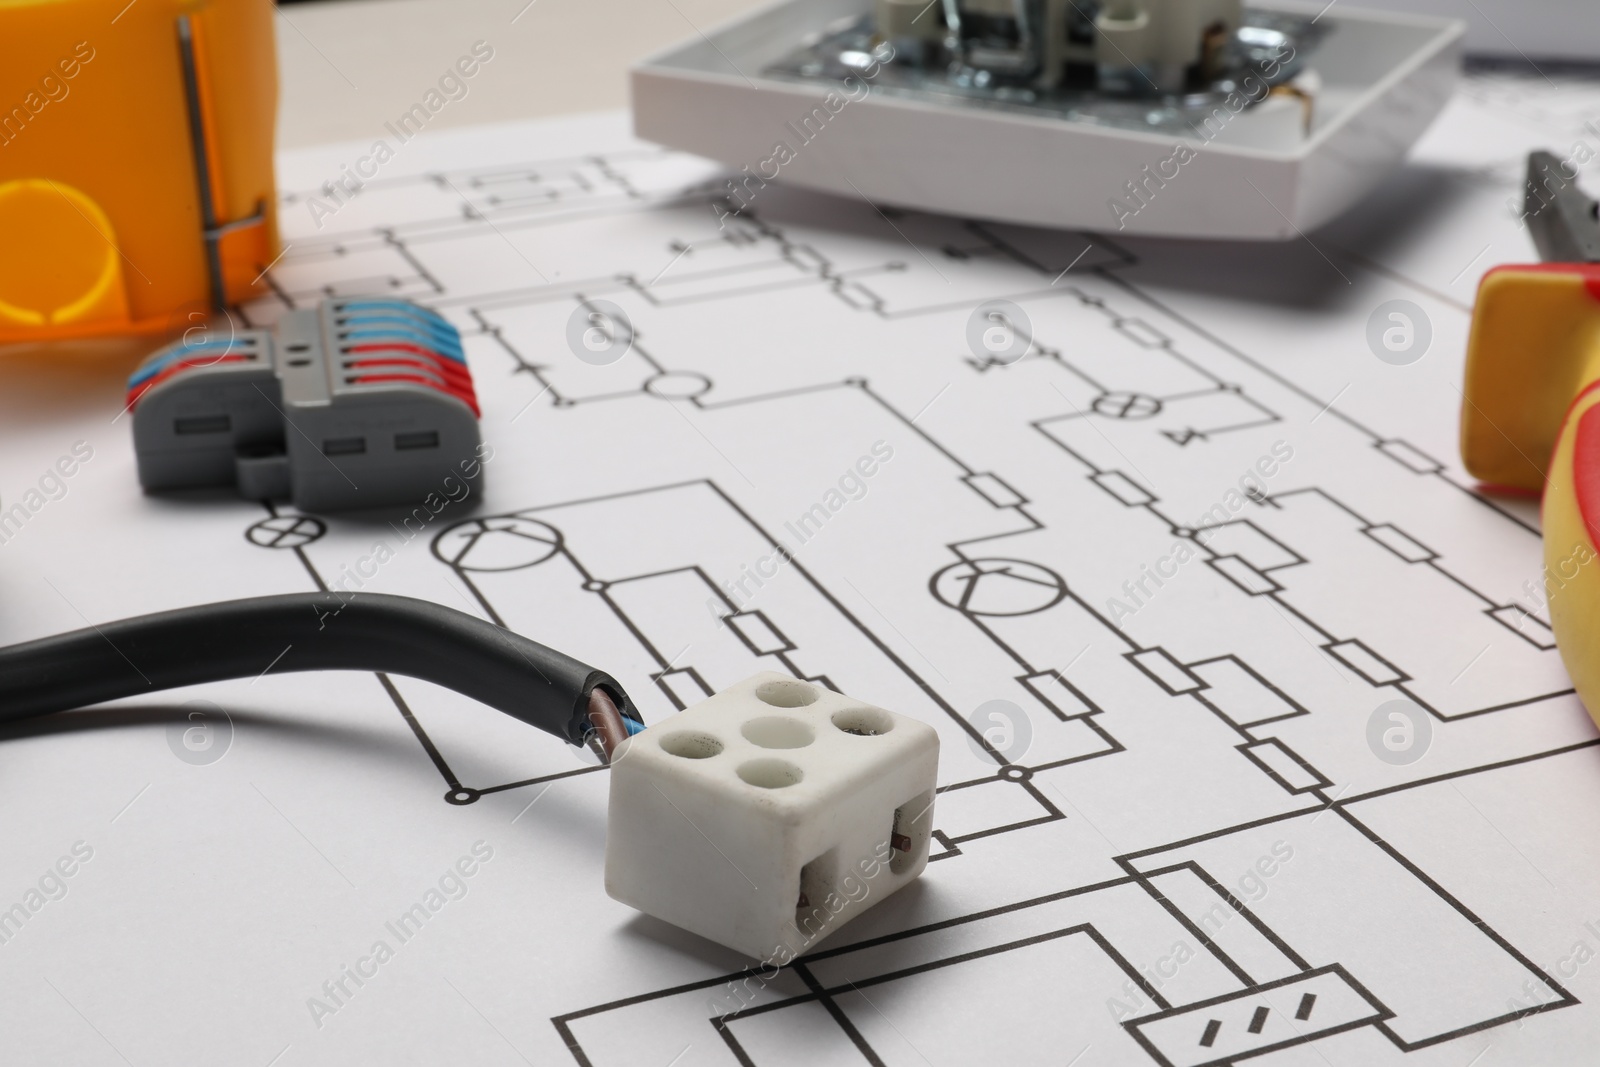 Photo of Wiring diagram and different electrician's equipment on table, closeup